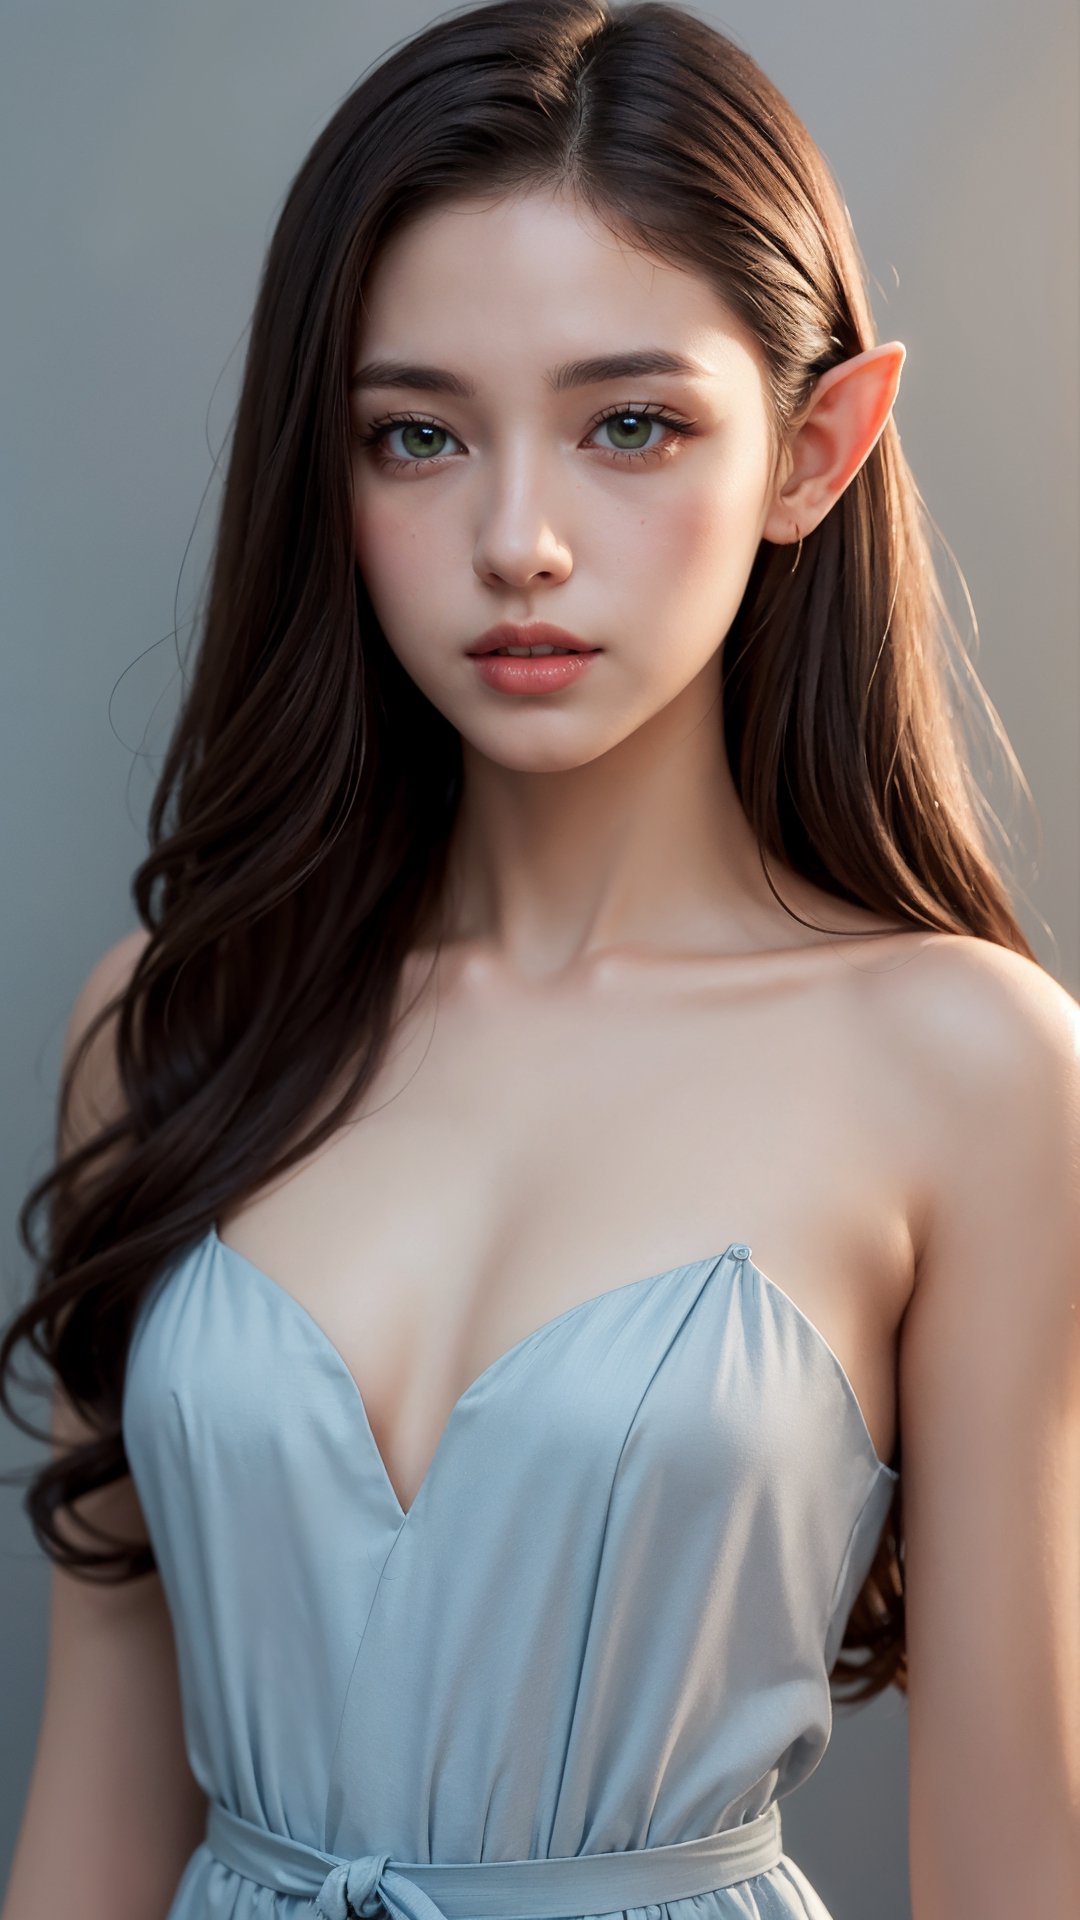 Masterpiece, top quality, realistic, low key, soft light, original photo, grey background, face, only face, look straight ahead, very detailed faces,  take a picture of her face, lens 50mm F1.2, elf, elf girl, 1girl, light blue classical dress, 23 years old, 180cm, thin waist, waist length long curly hair, very long hair, brown hair, green eyes, small breasts, detailed skin, pores.